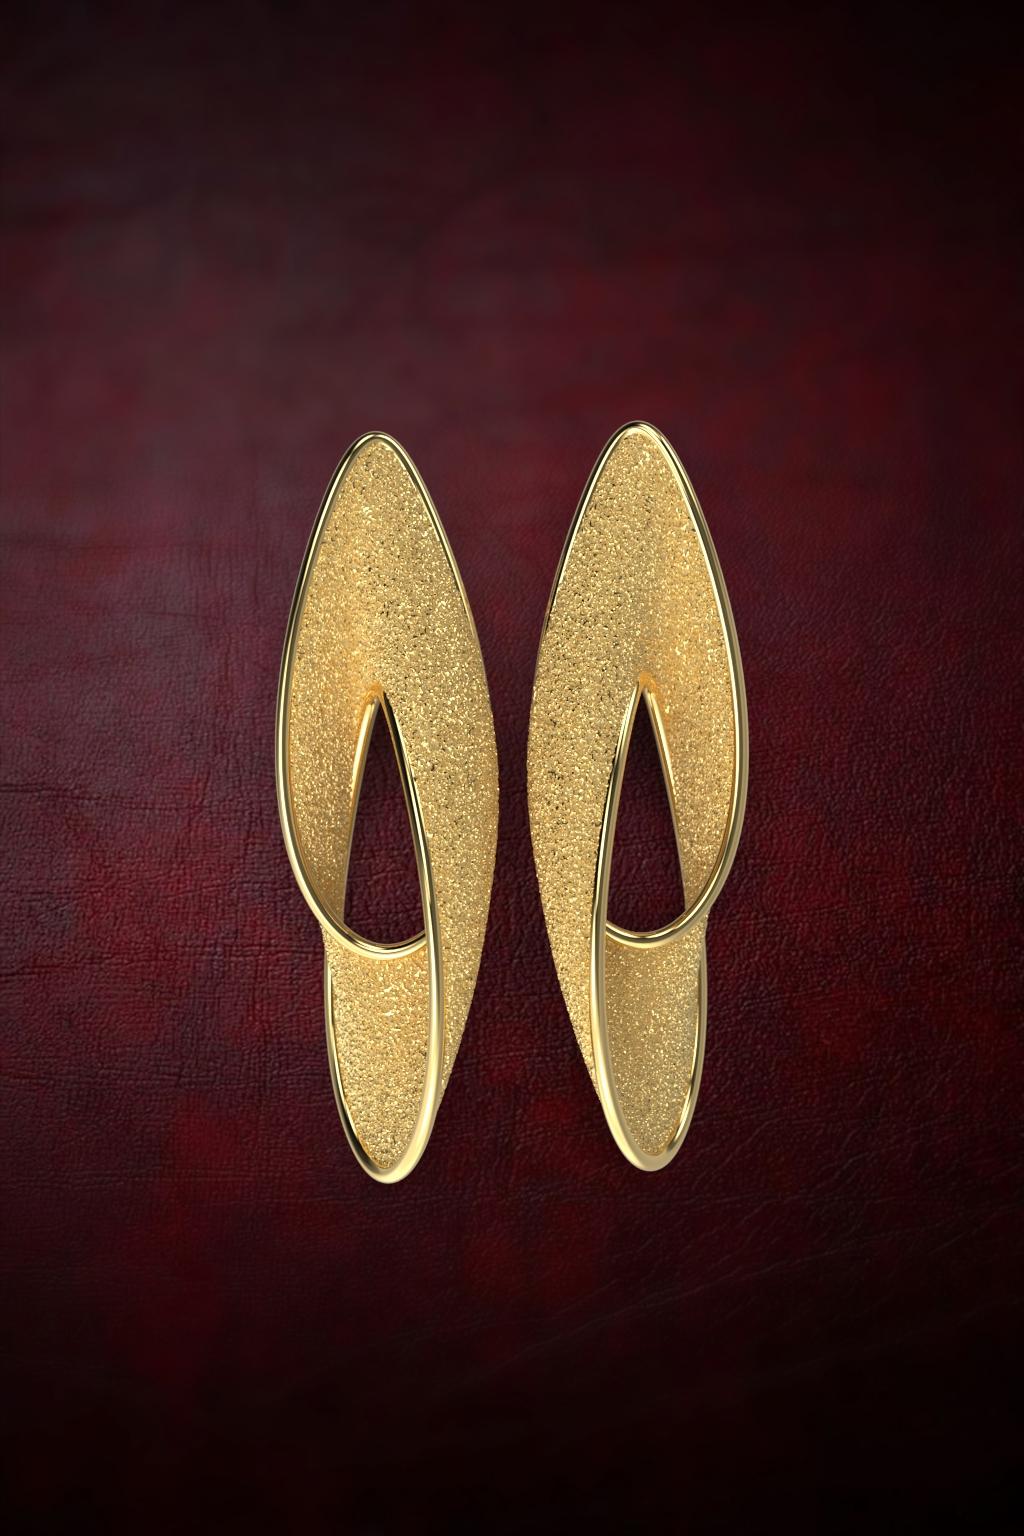 Statement Gold Earrings in 14k Solid Gold, Made in Italy Fine Jewelry For Sale 1